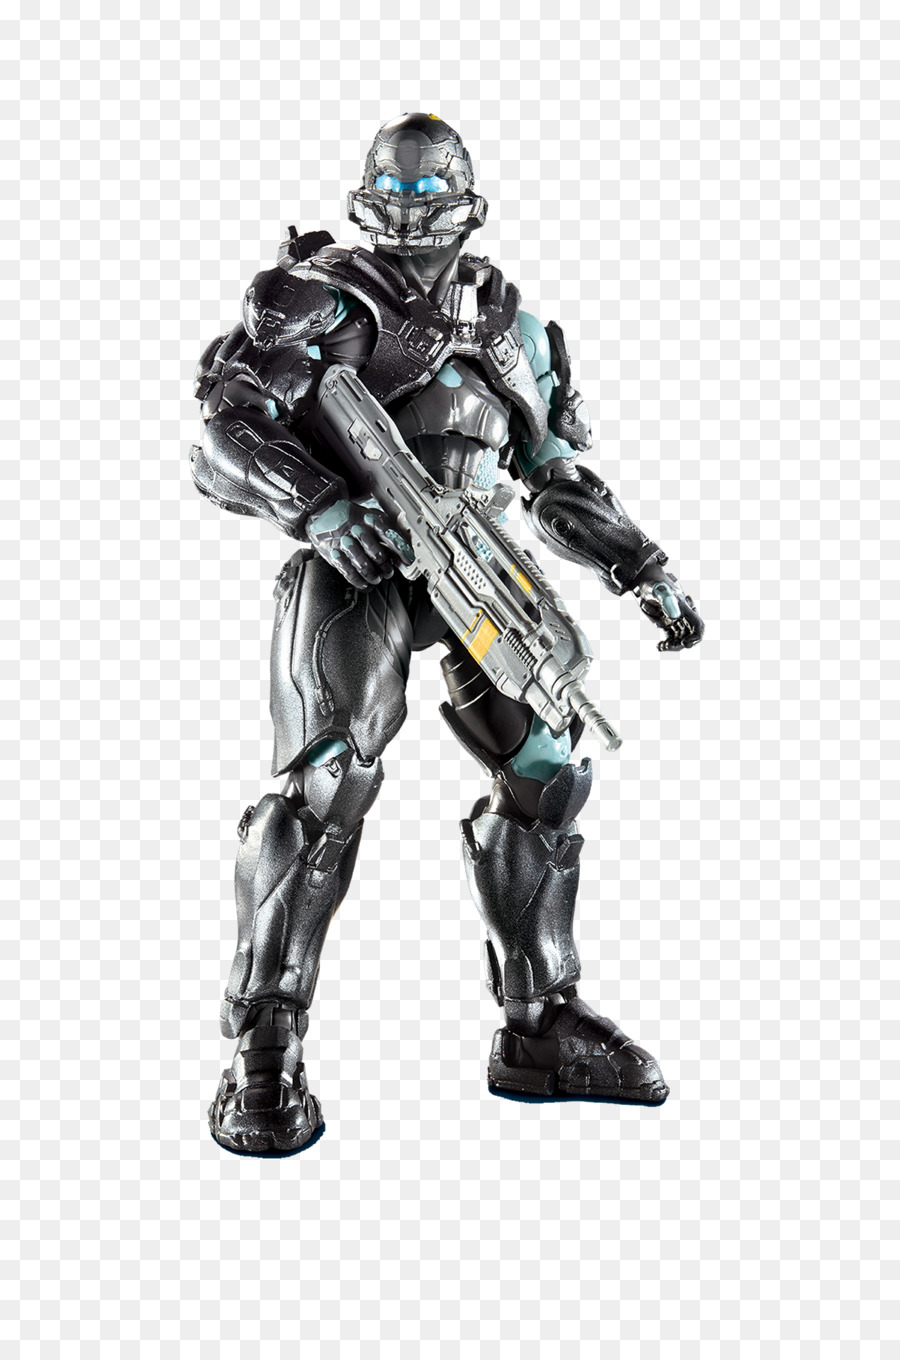 Halo Combat Evolved，Master Chief PNG